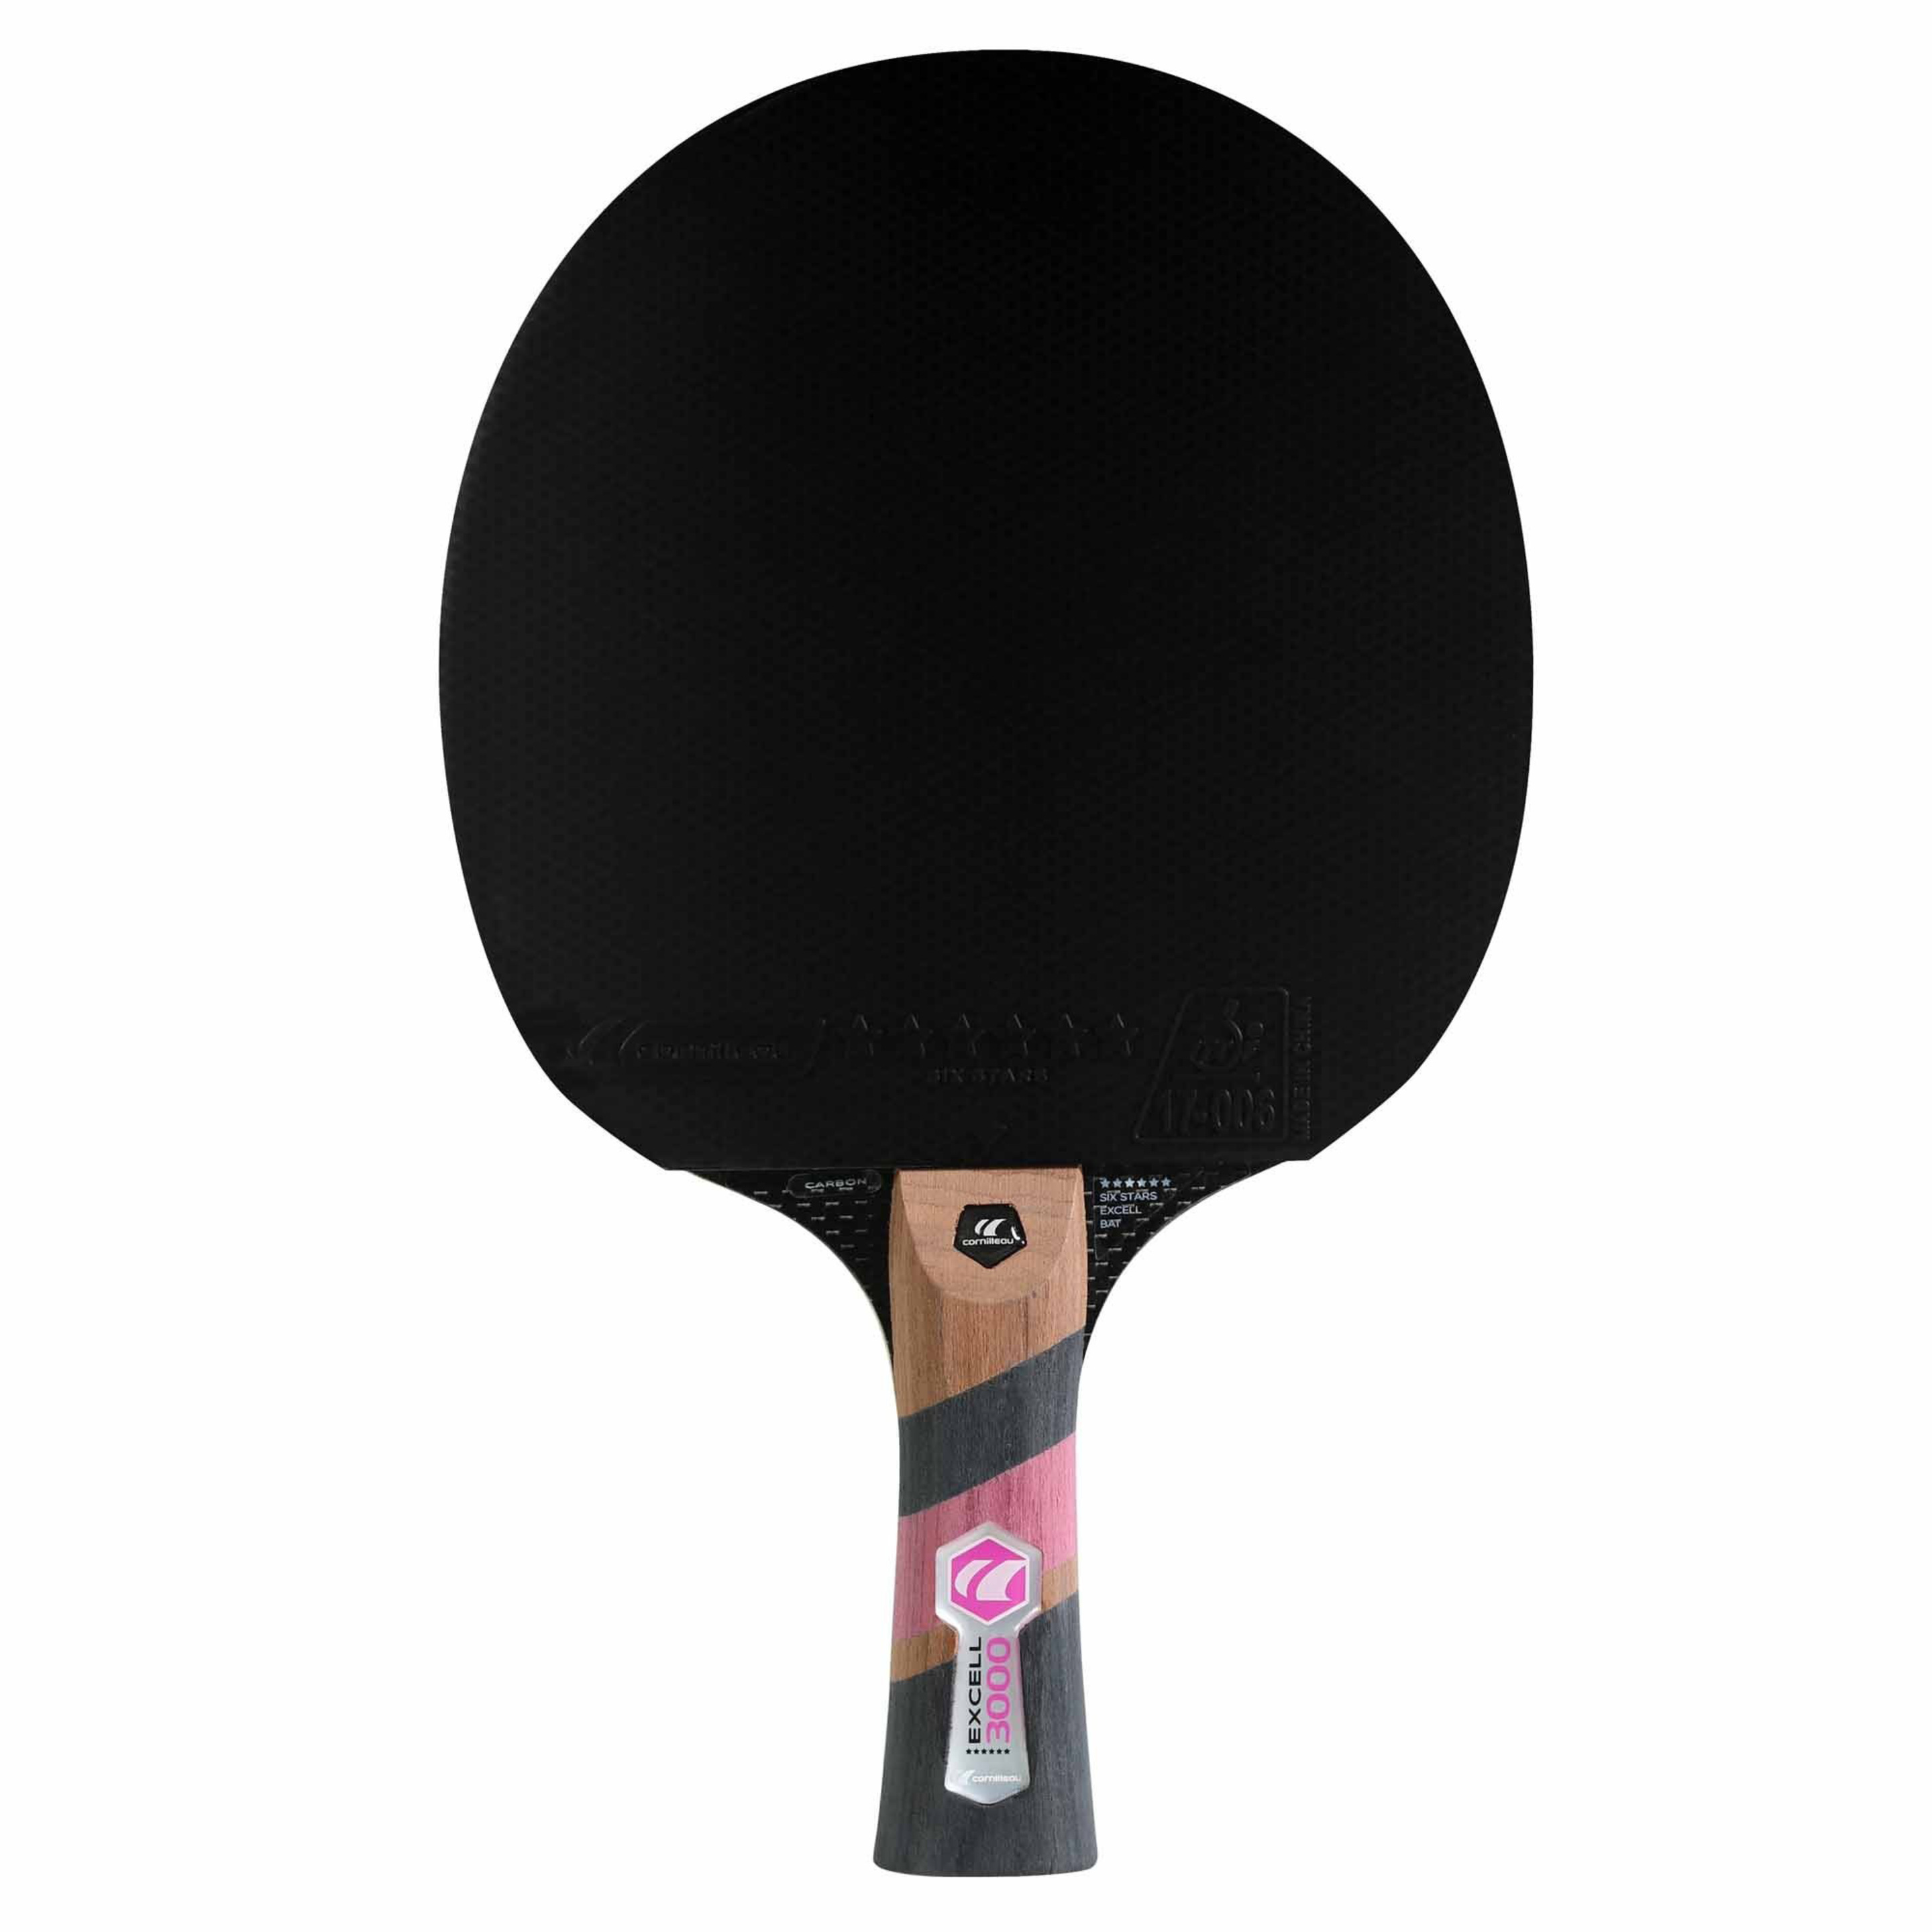 Ping Pong Cornililleau Sport 3000 Excell Carbon 413000 - negro - 